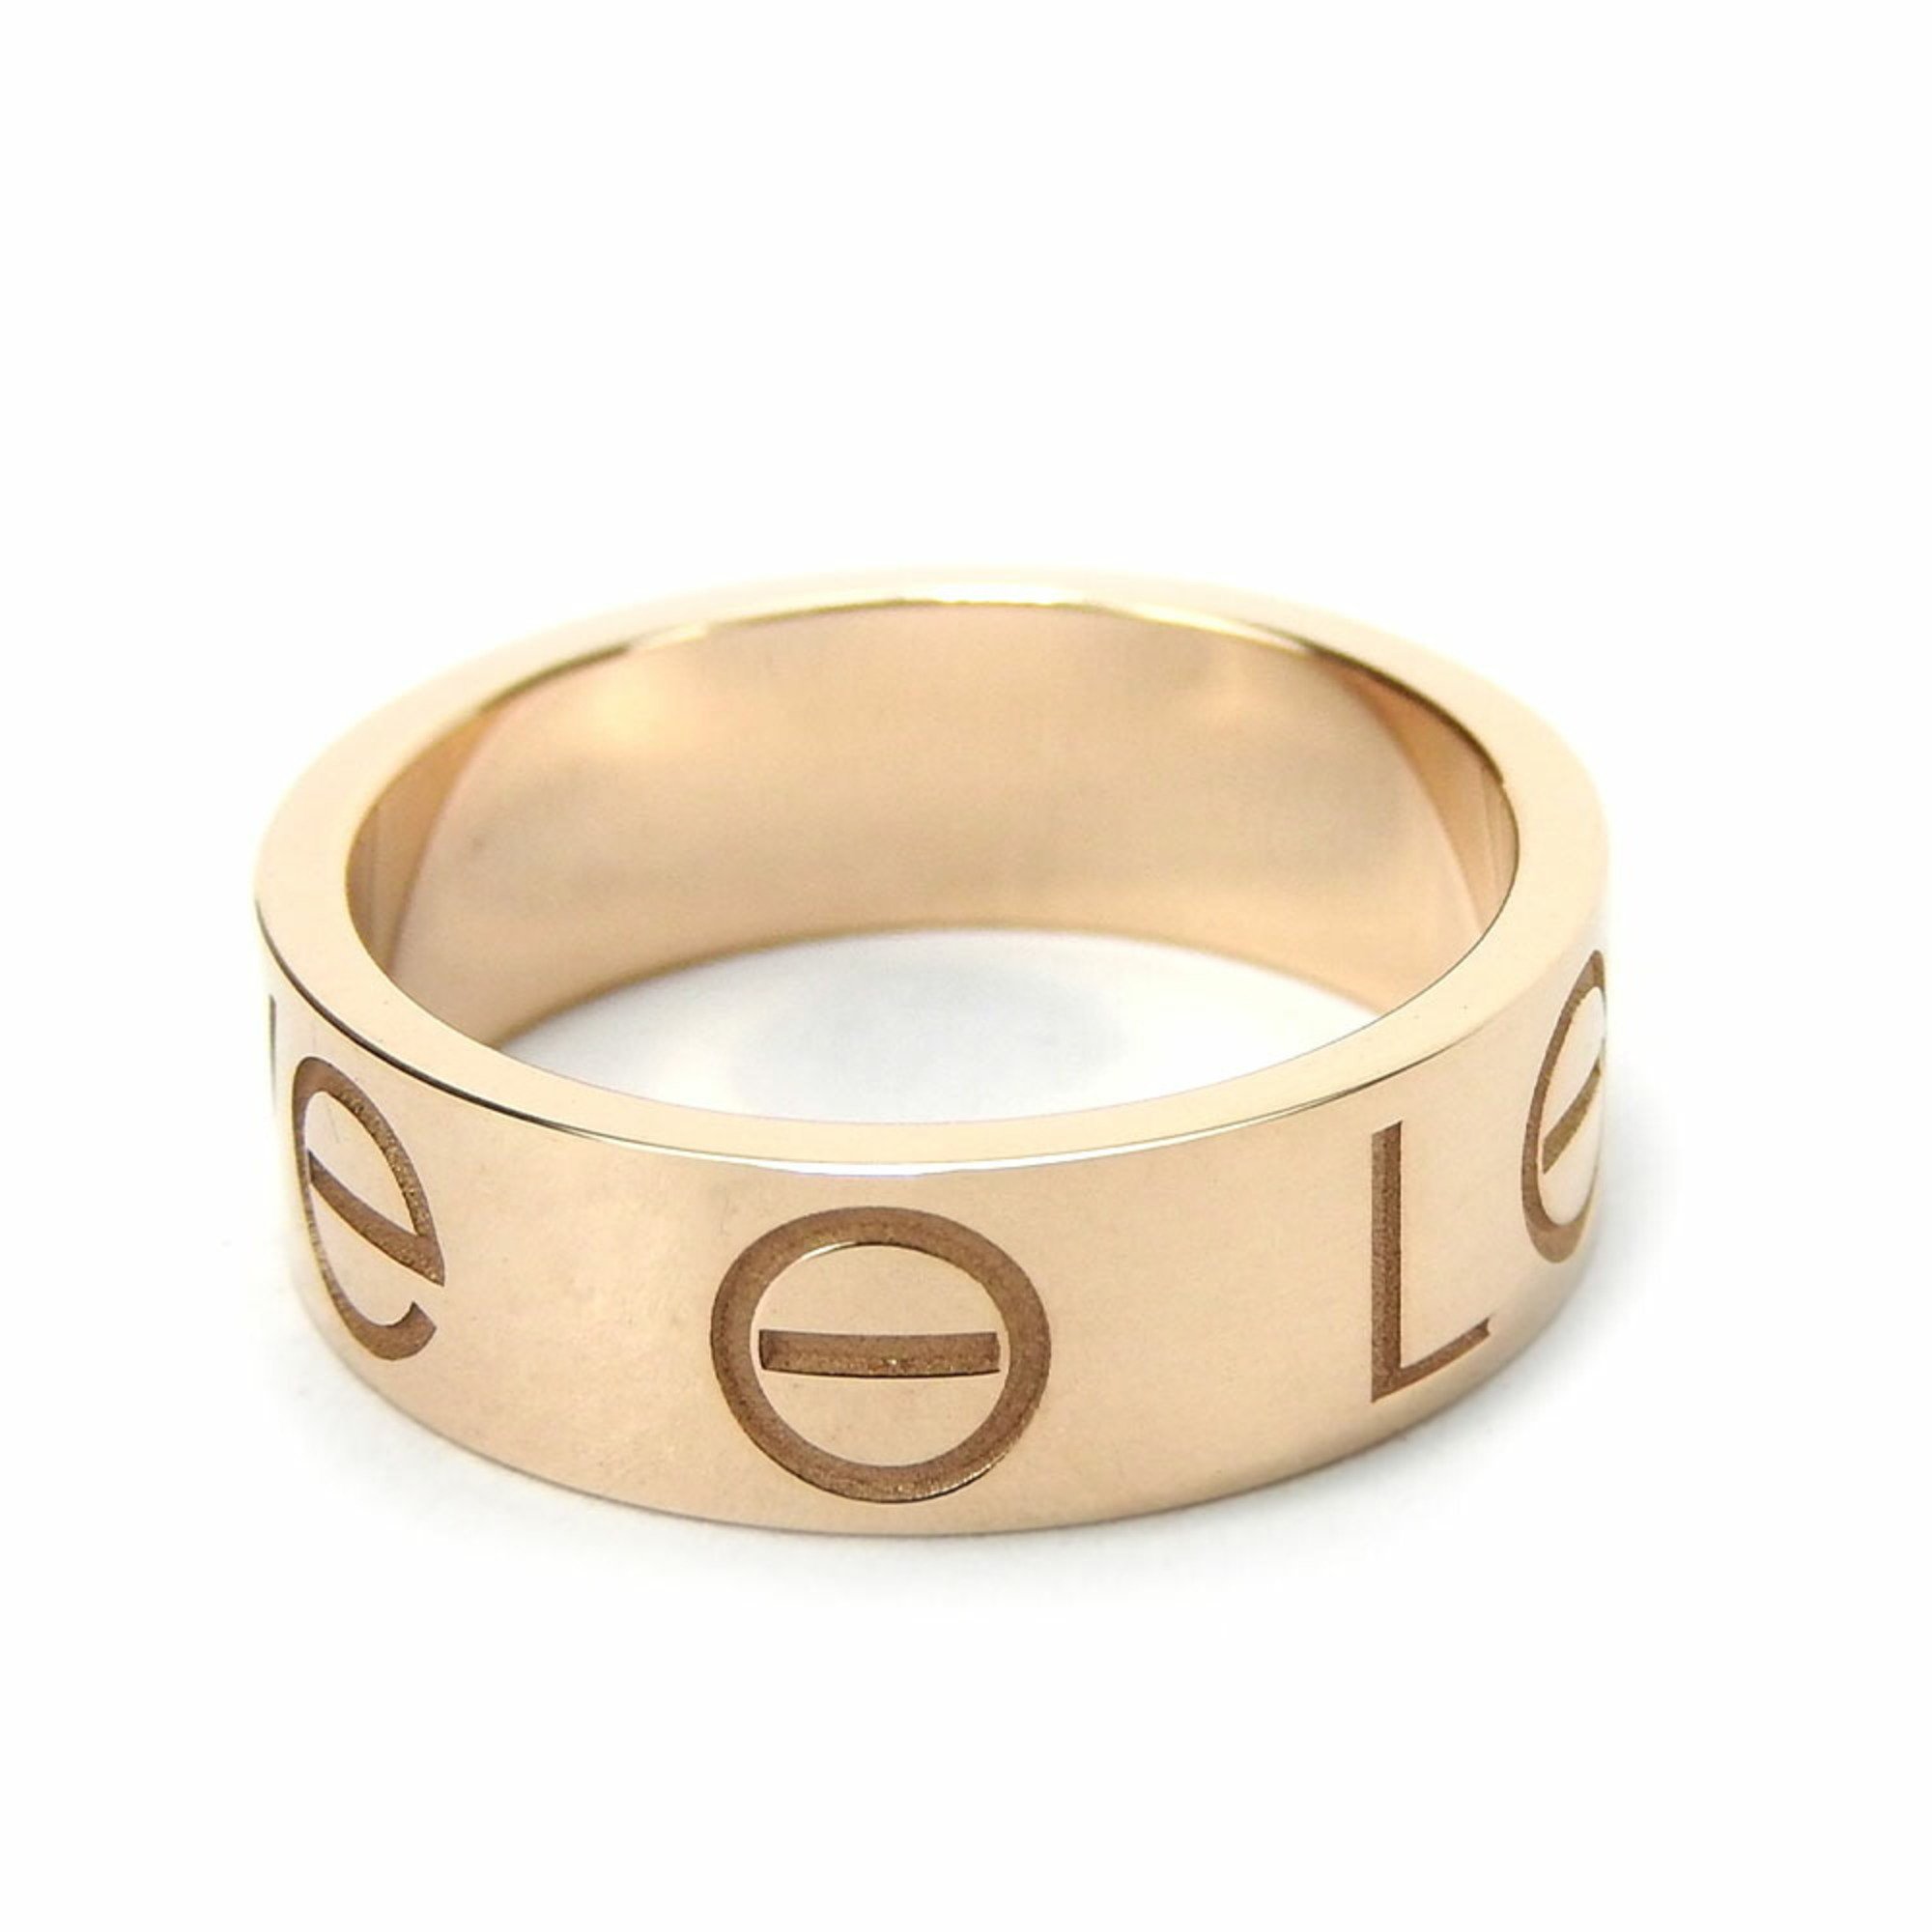 Cartier Ring Love 49 K18PG approx. 5.4g Pink Gold 2006 Limited Edition Women's CARTIER